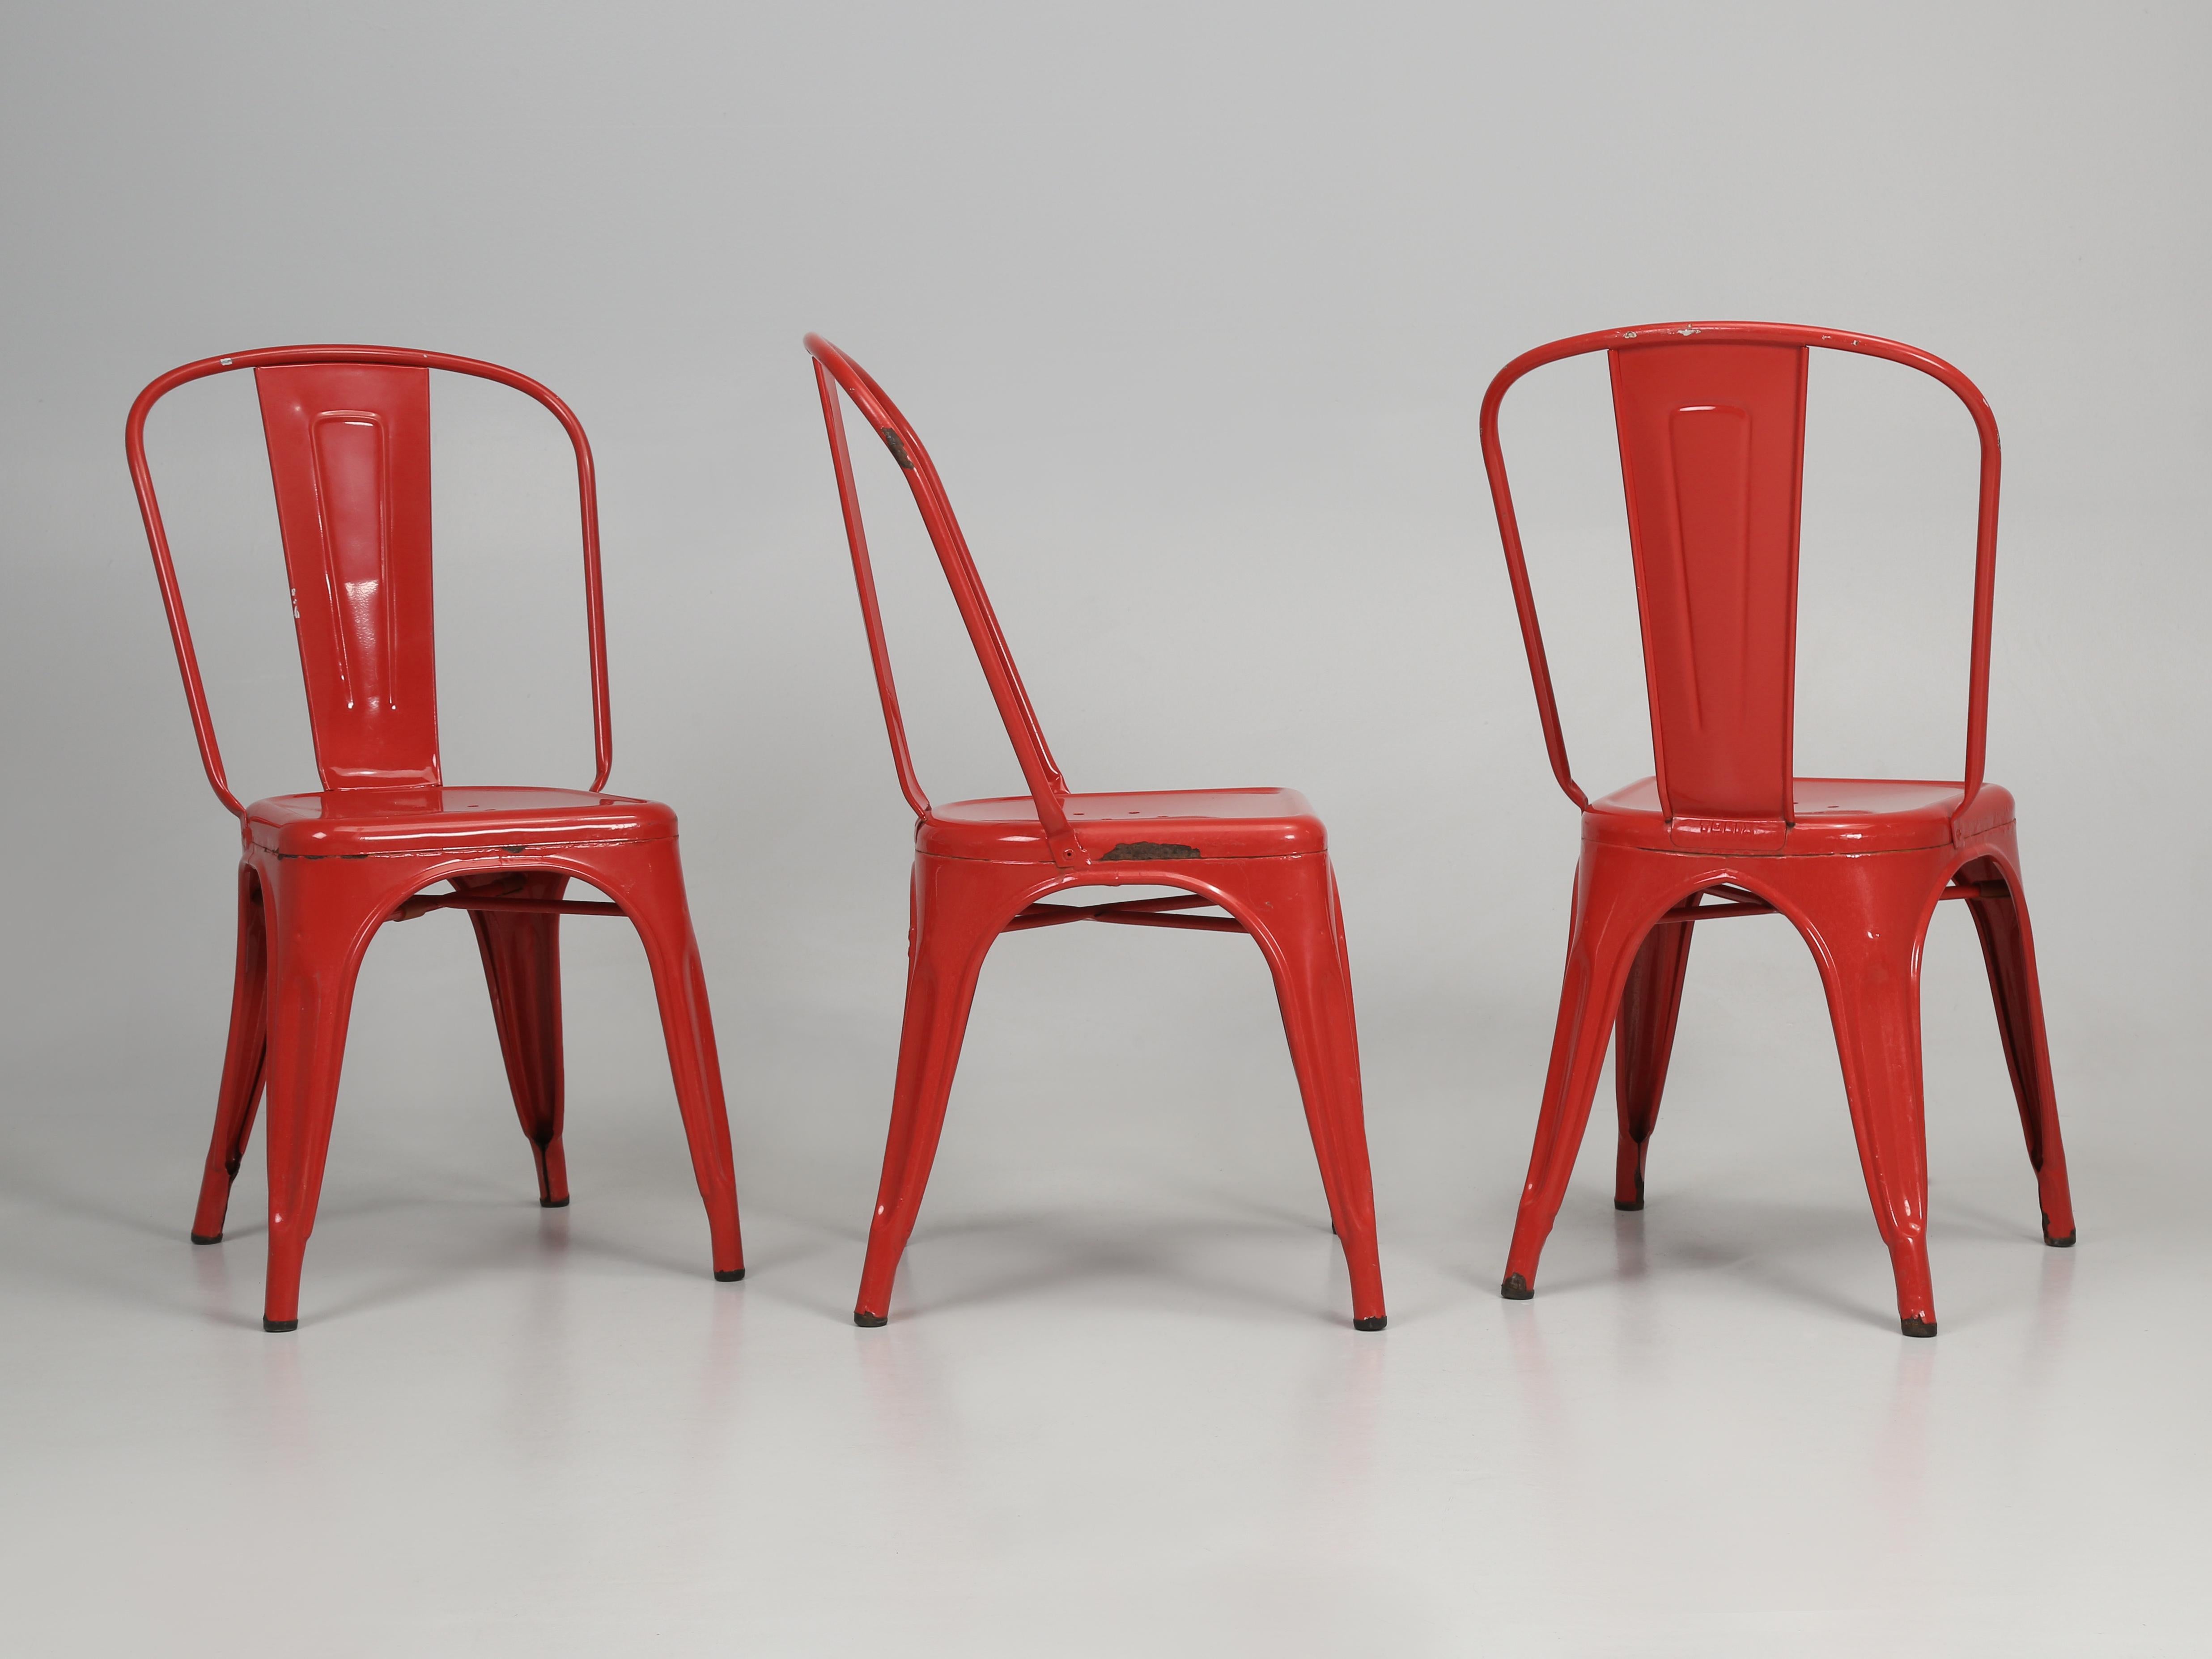 French Set of (4) Authentic Vintage Tolix steel chairs.  Tolix Steel Stacking Chairs have been hand-made for about 100-years in France, while this Set of (4) Red Tolix Chairs looks to be made in the 1950's or 1960's. Should you prefer a different